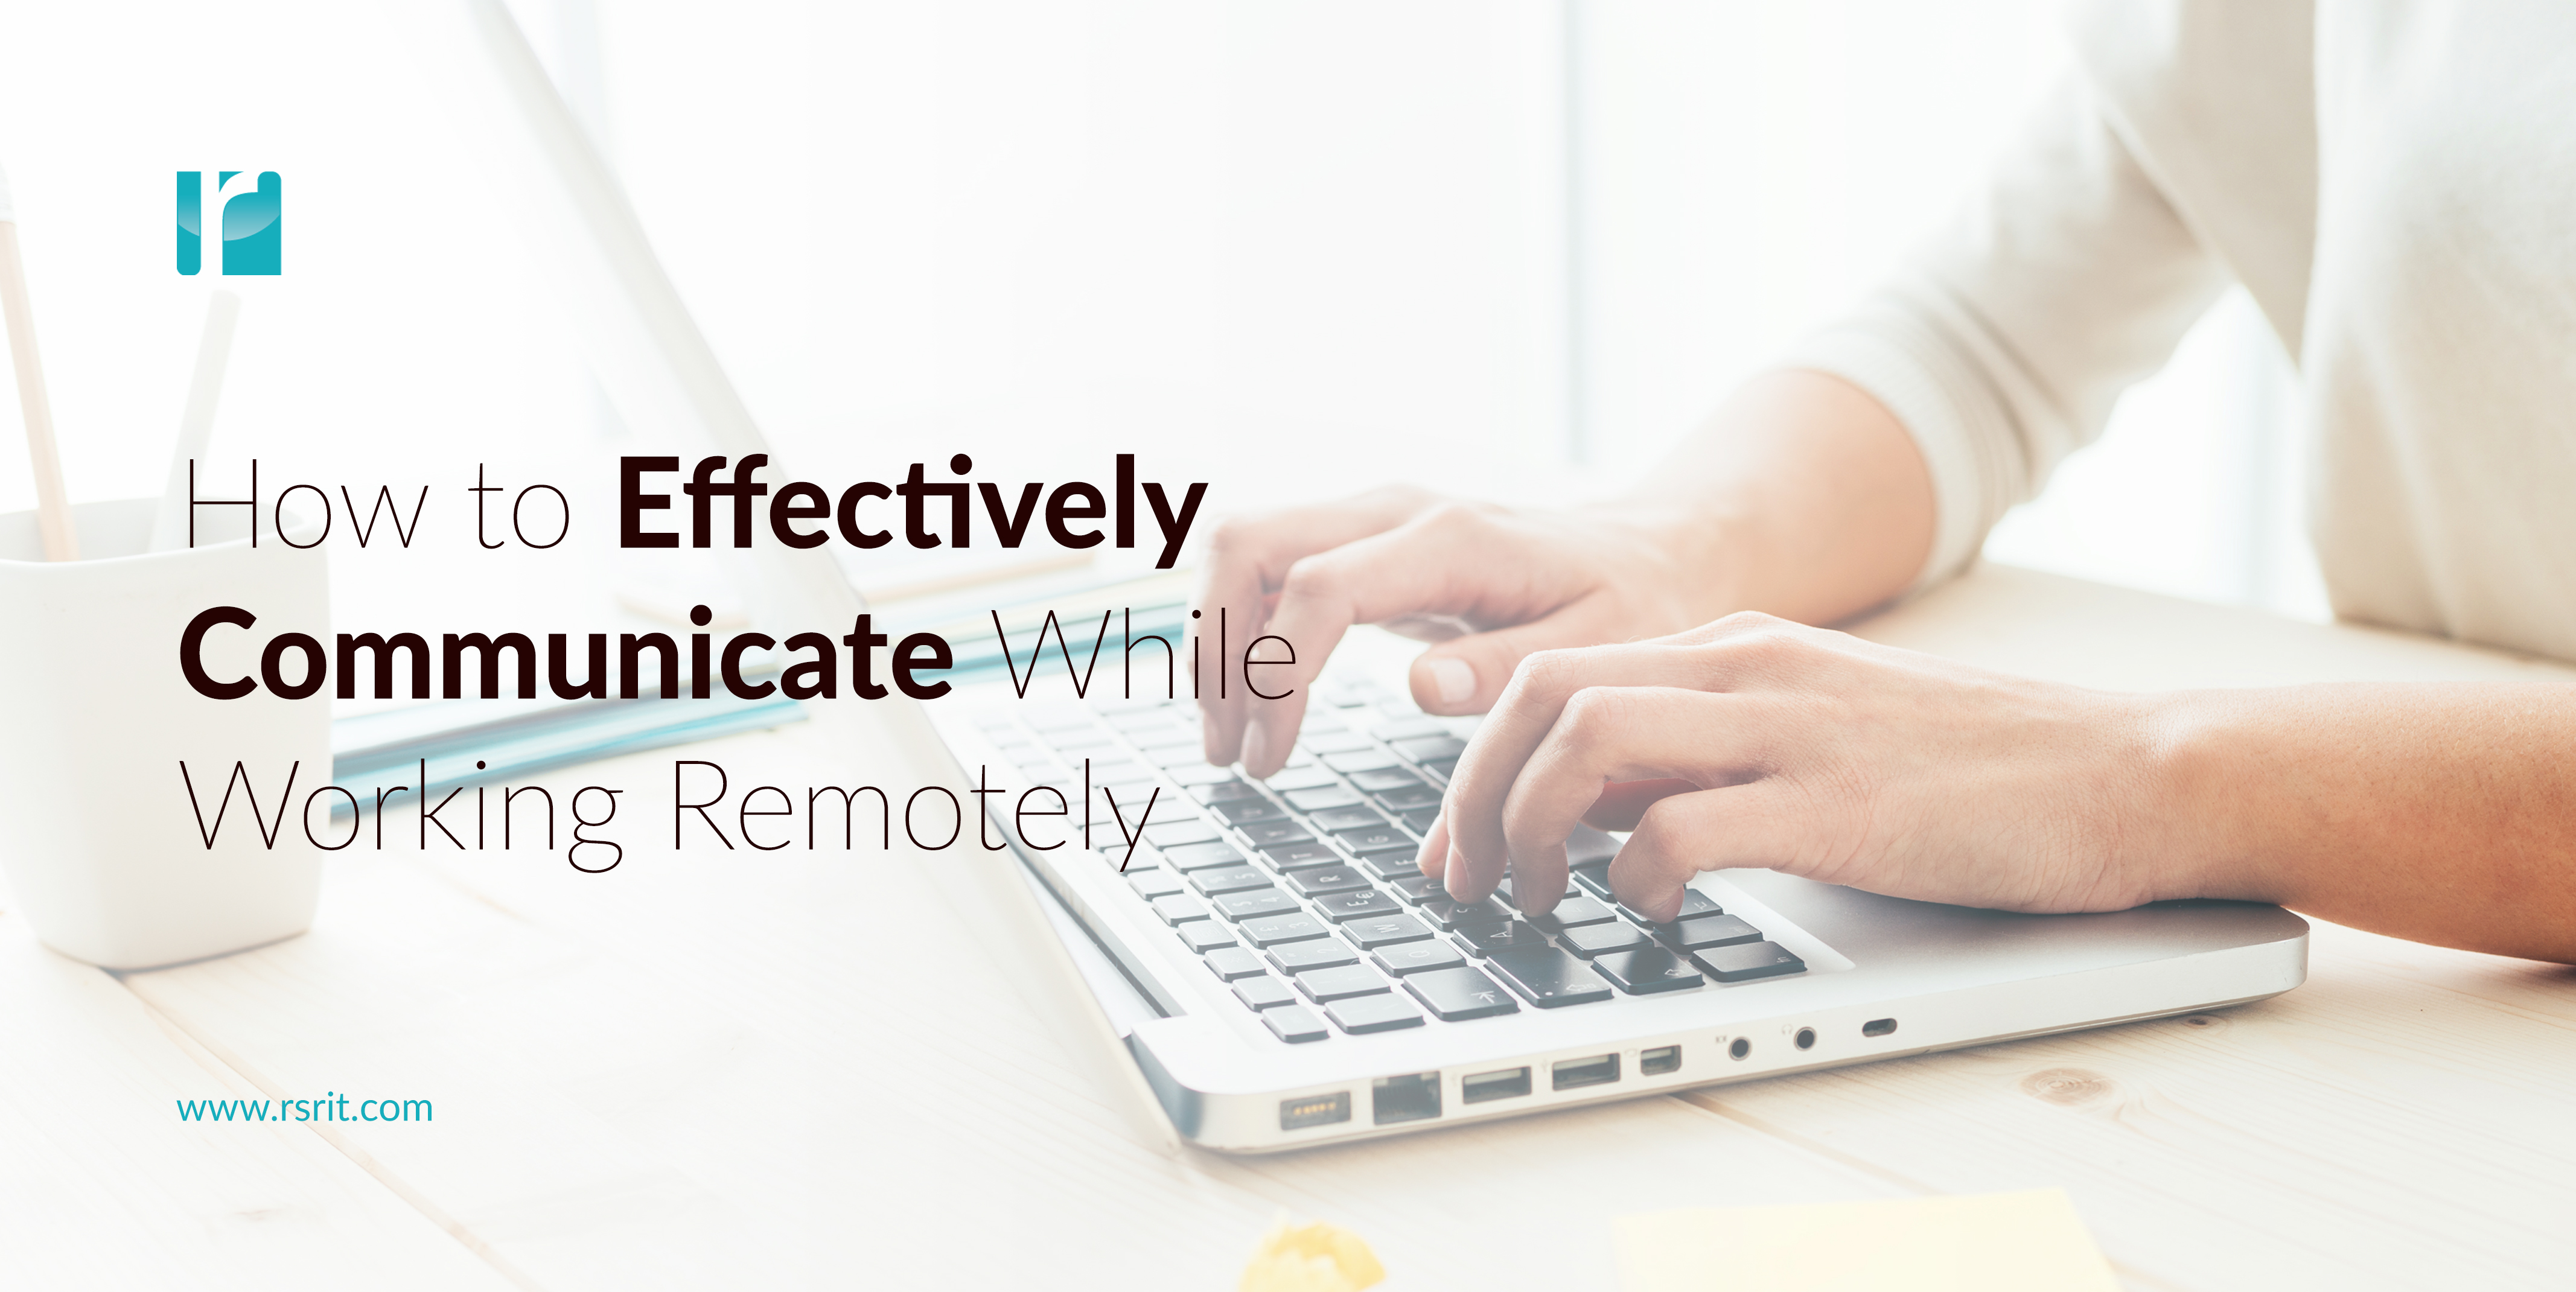 How to Effectively Communicate While Working Remotely